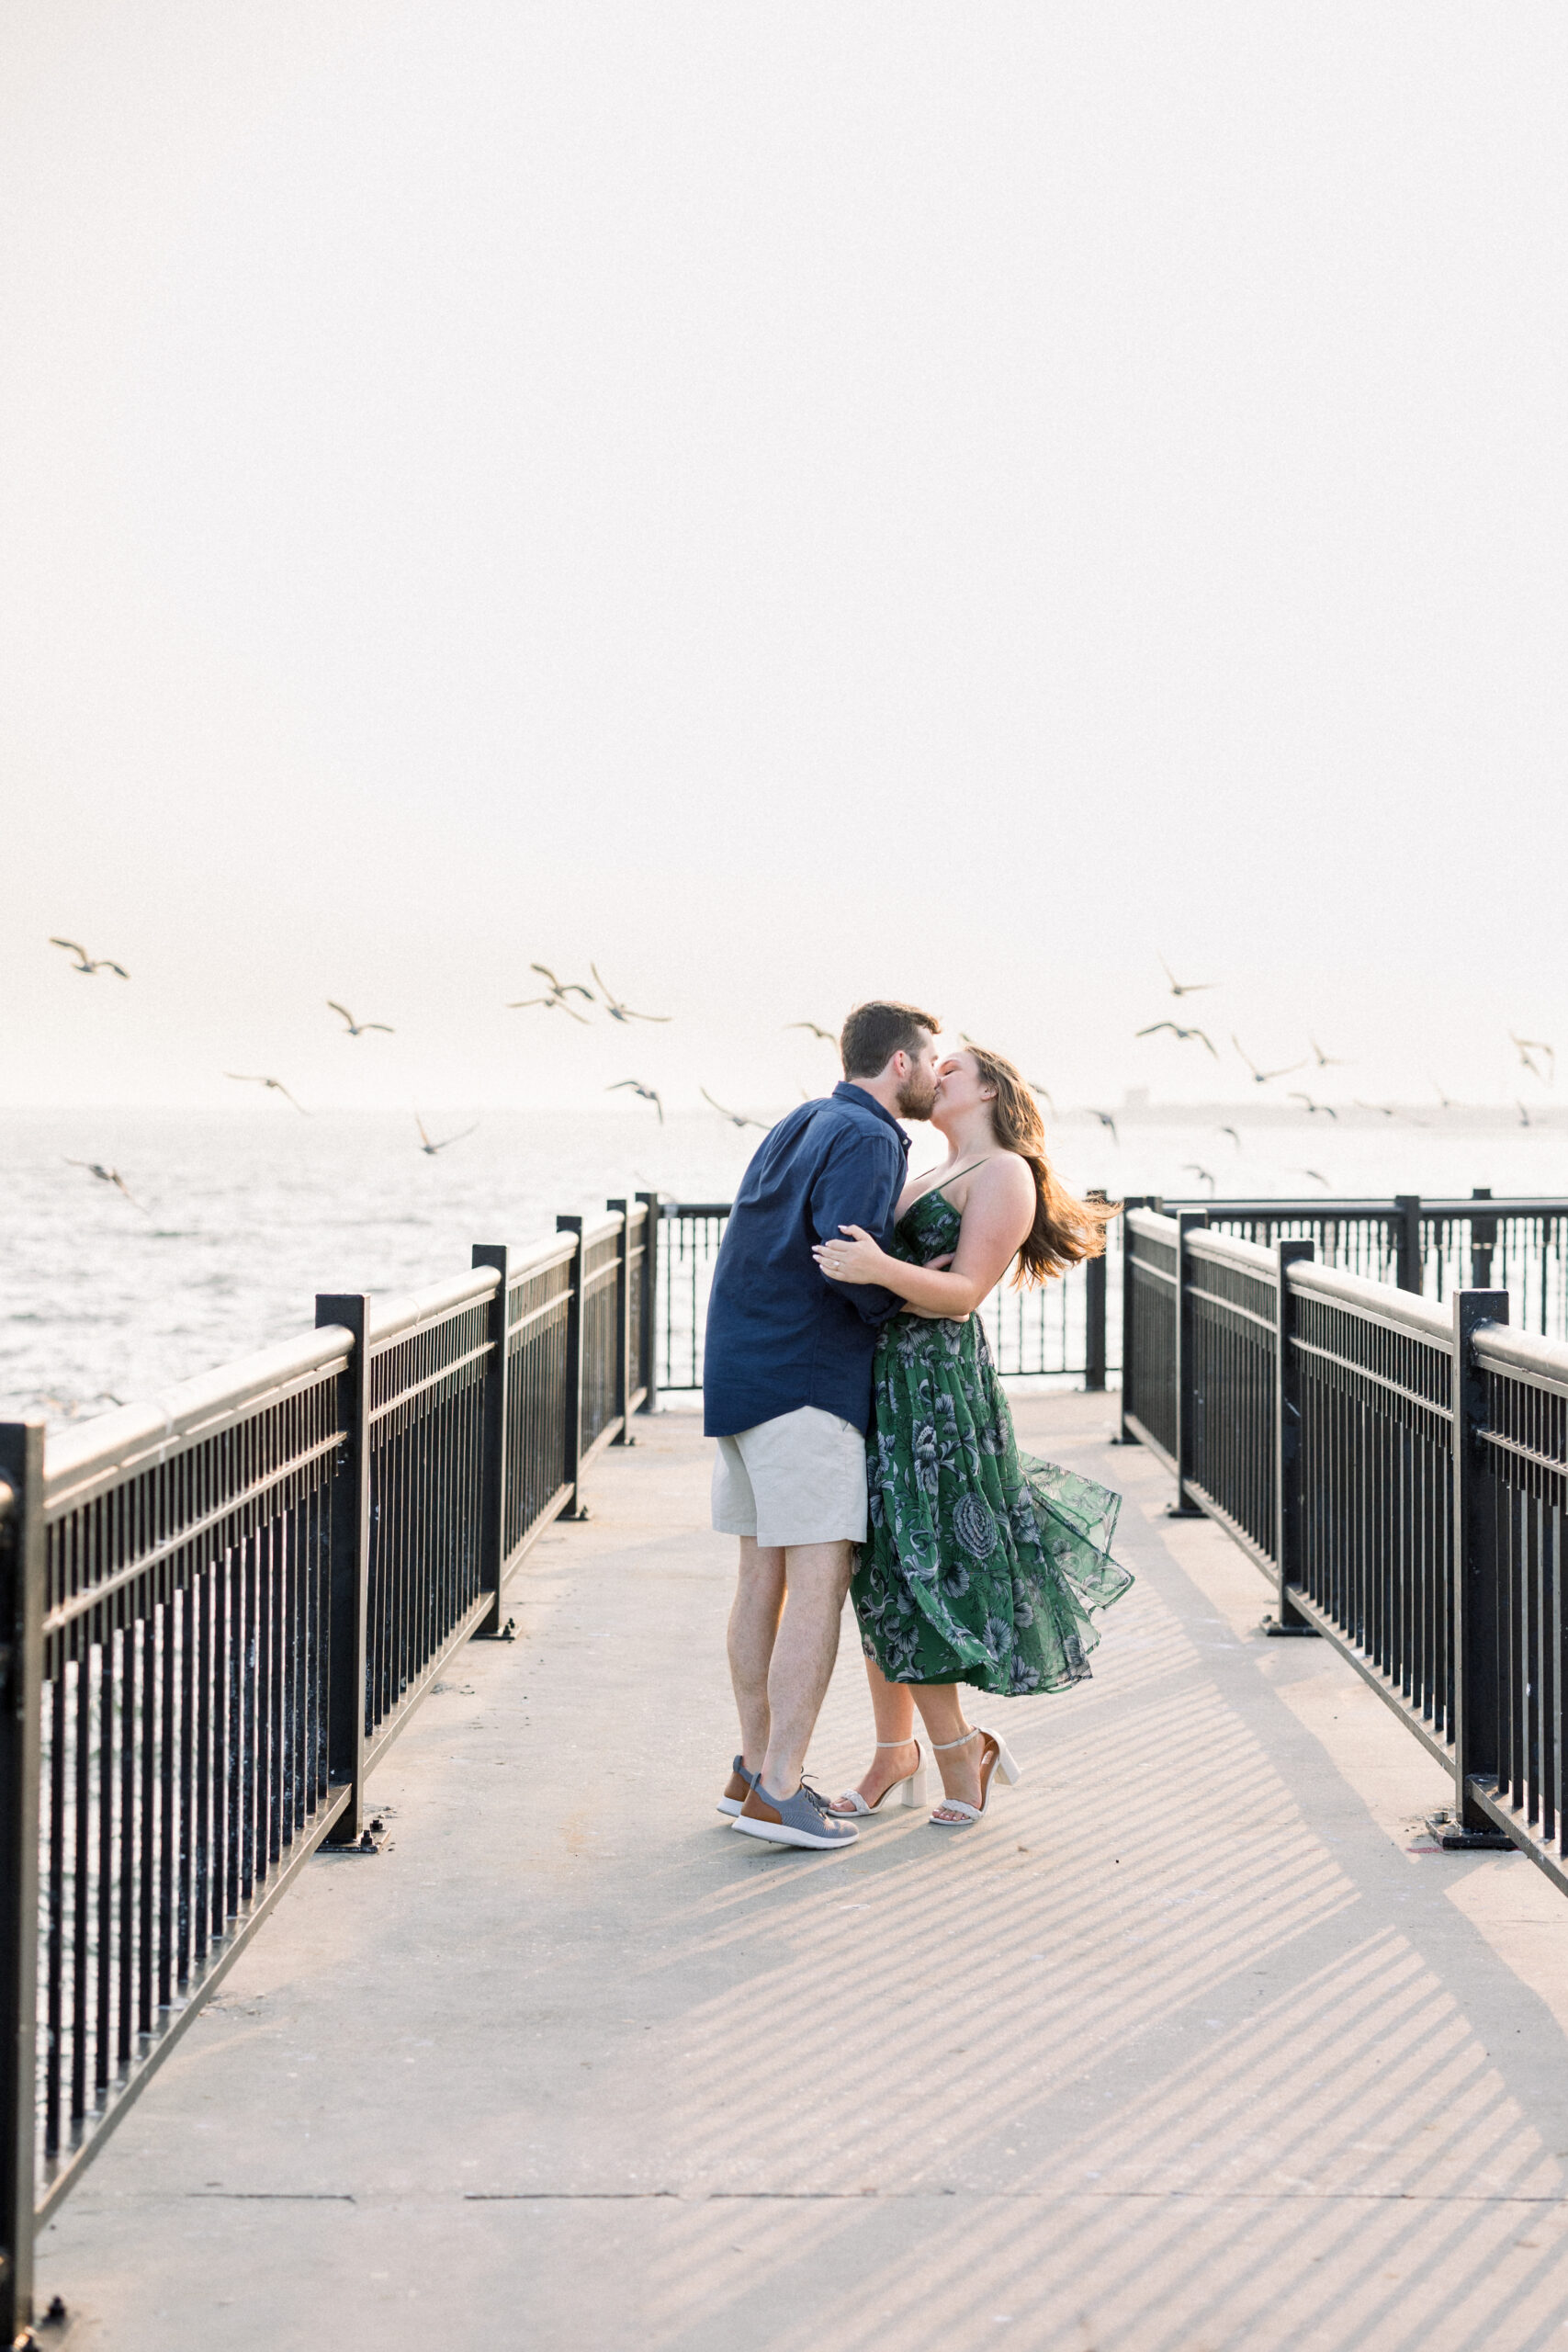 Couple Kissing on Pensacola Pier with Birds and Water Behind Them